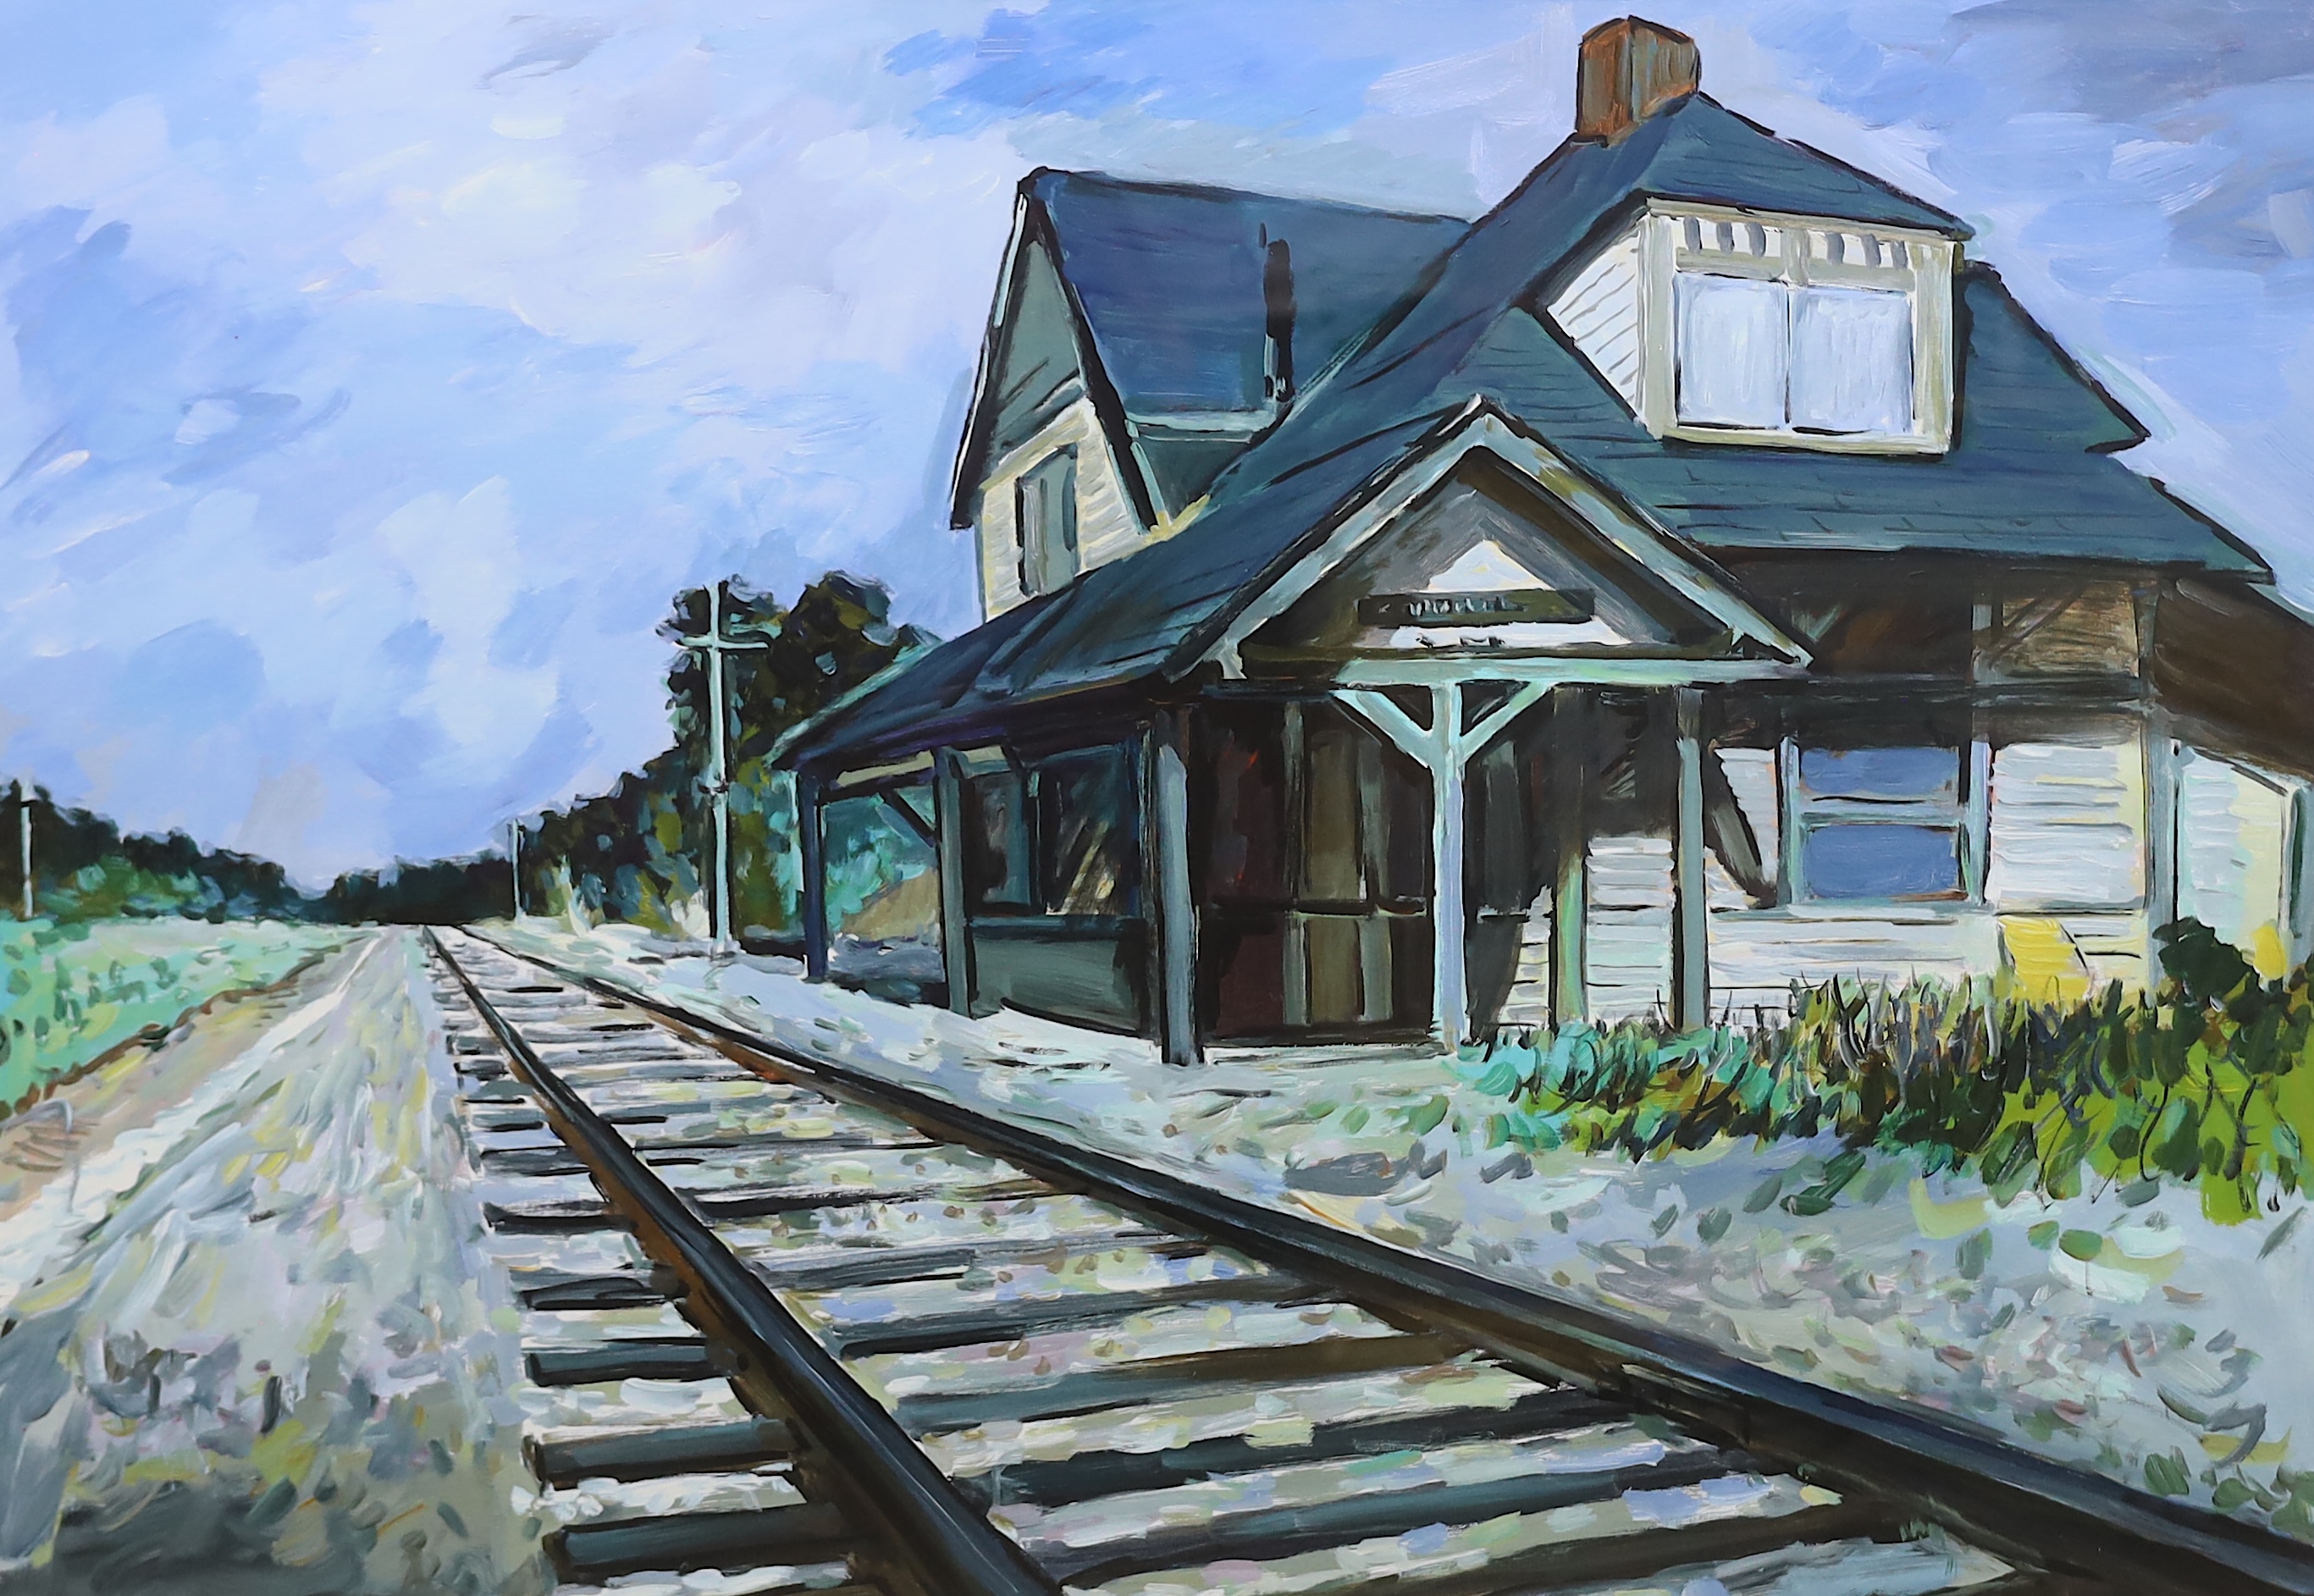 Bob Dylan (American, b.1941), 'New England Depot' from the Beaten Path Series, giclée print on archival paper, 66 x 91cm